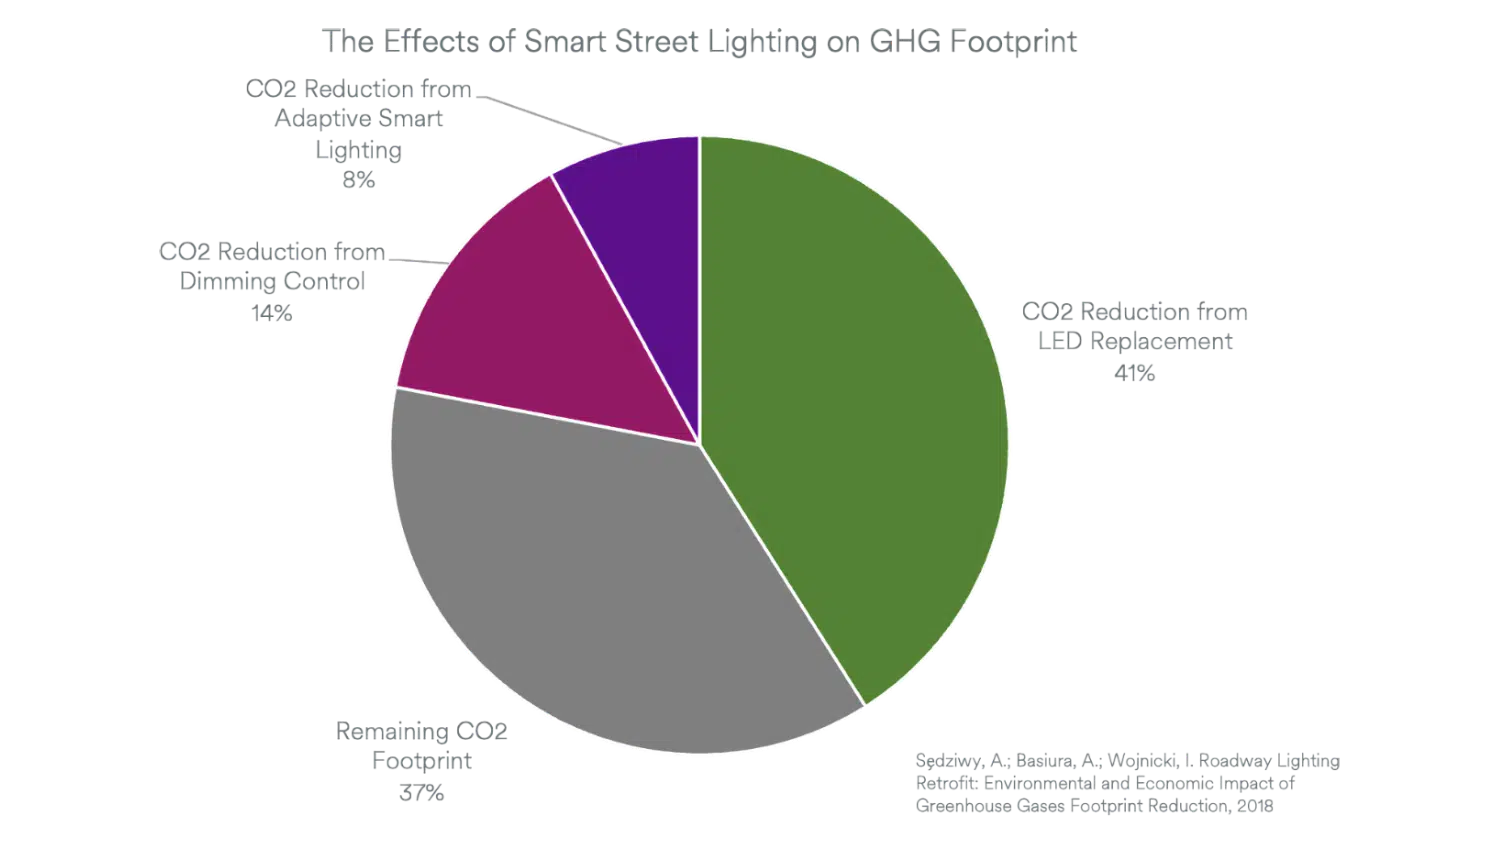 The Effects of Smart Lighting on the GHG Footprint of Street Lighting